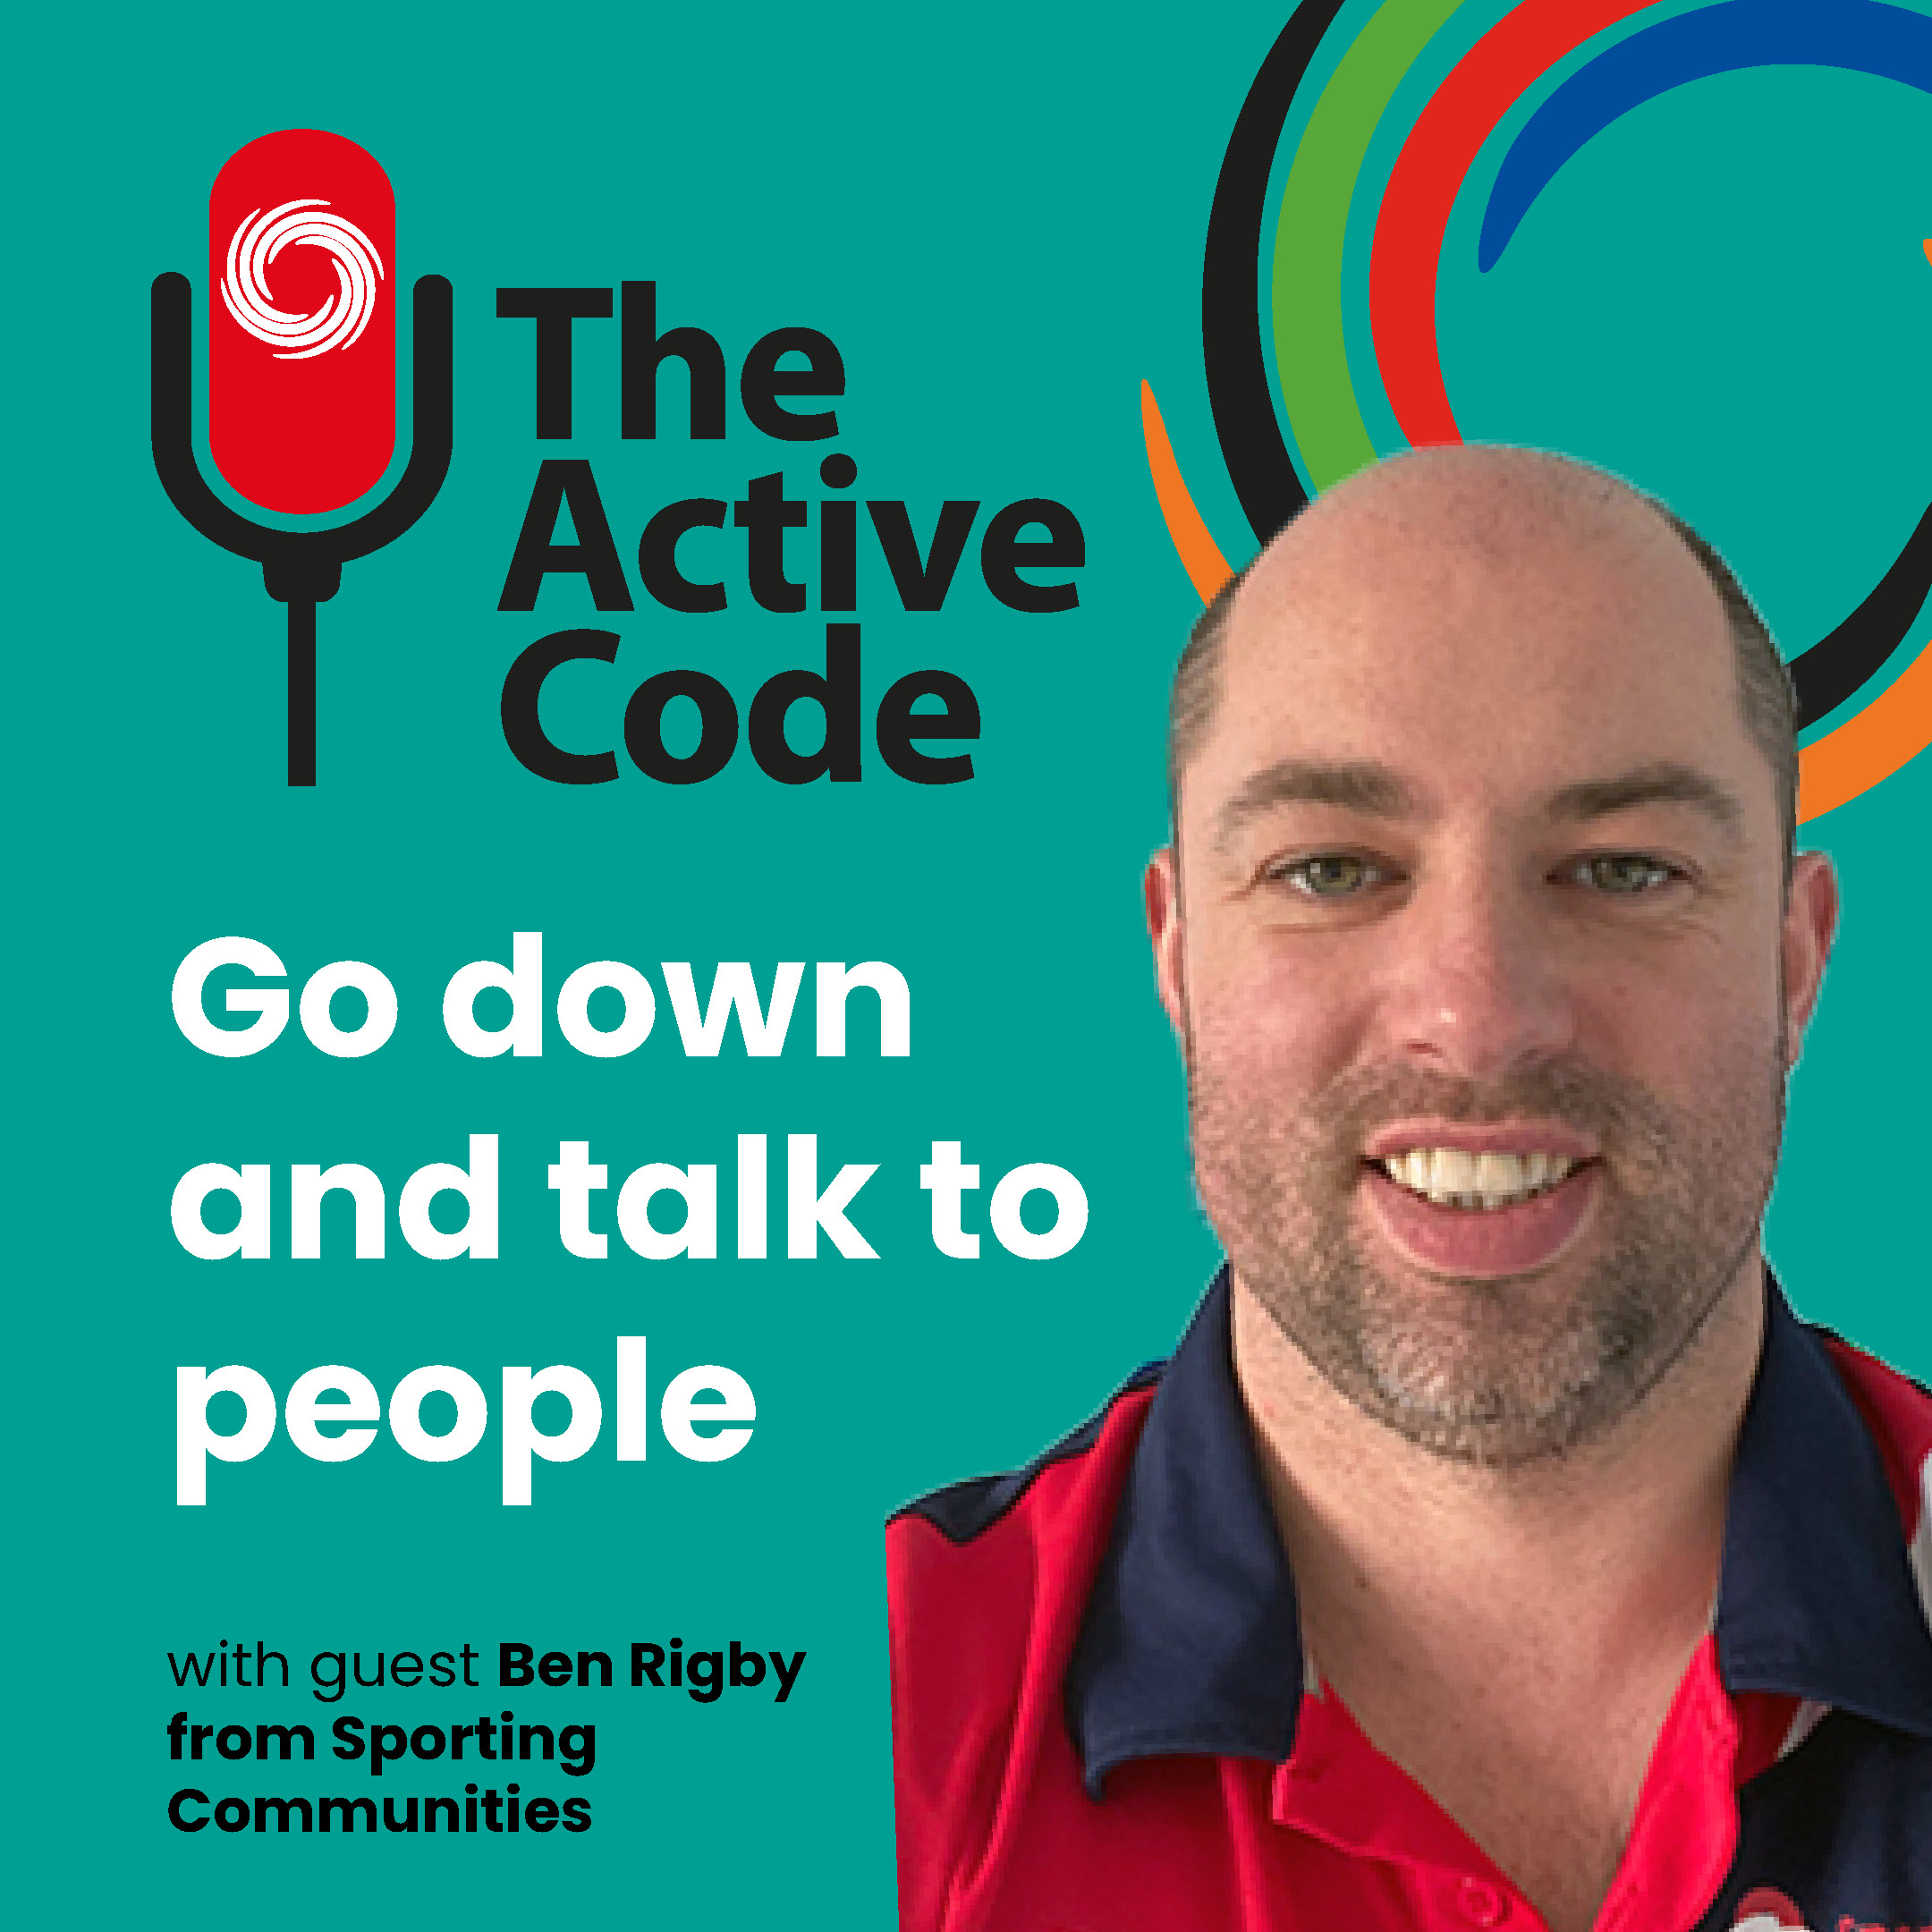 The Active Code – Go down and talk to people